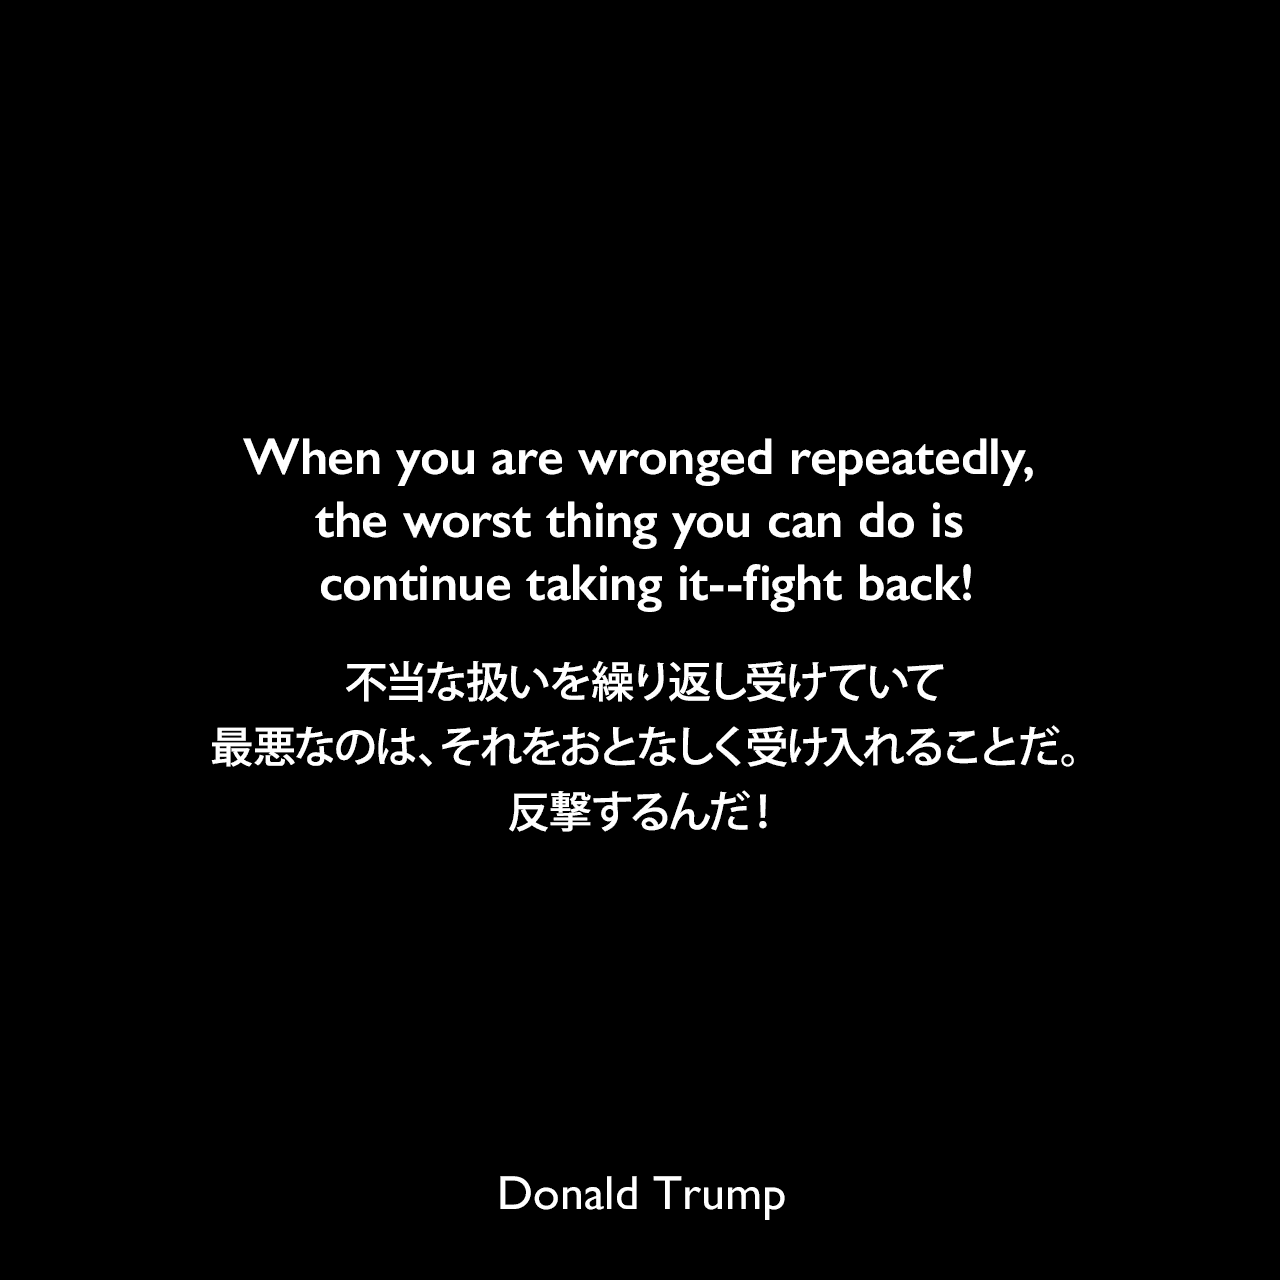 When you are wronged repeatedly, the worst thing you can do is continue taking it--fight back!不当な扱いを繰り返し受けていて、最悪なのは、それをおとなしく受け入れることだ。反撃するんだ！Donald Trump